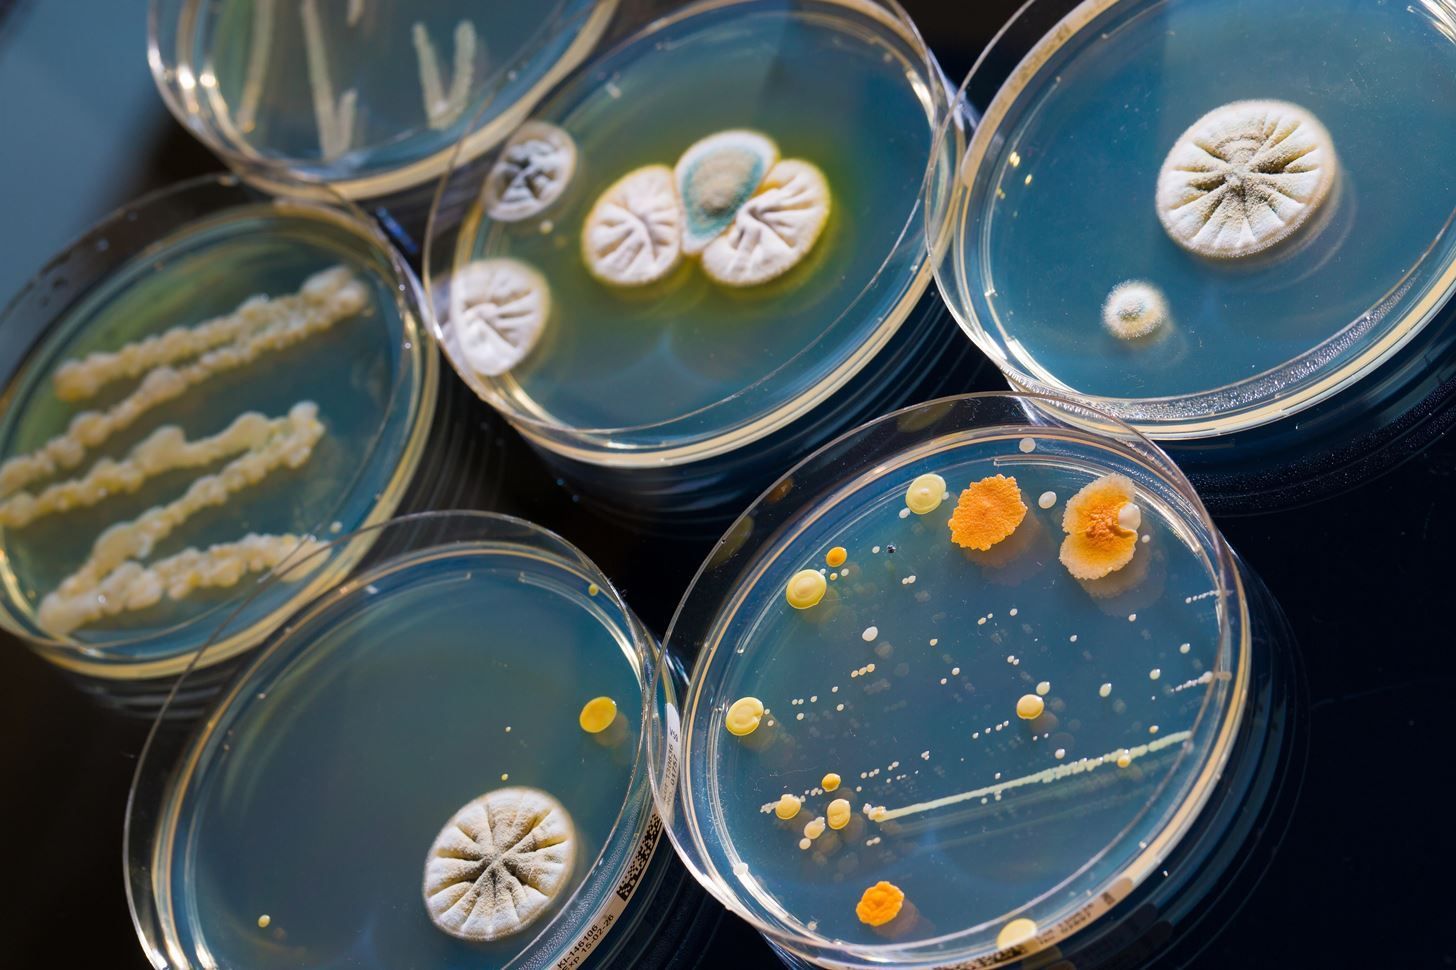 A group of petri dishes filled with different types of bacteria.